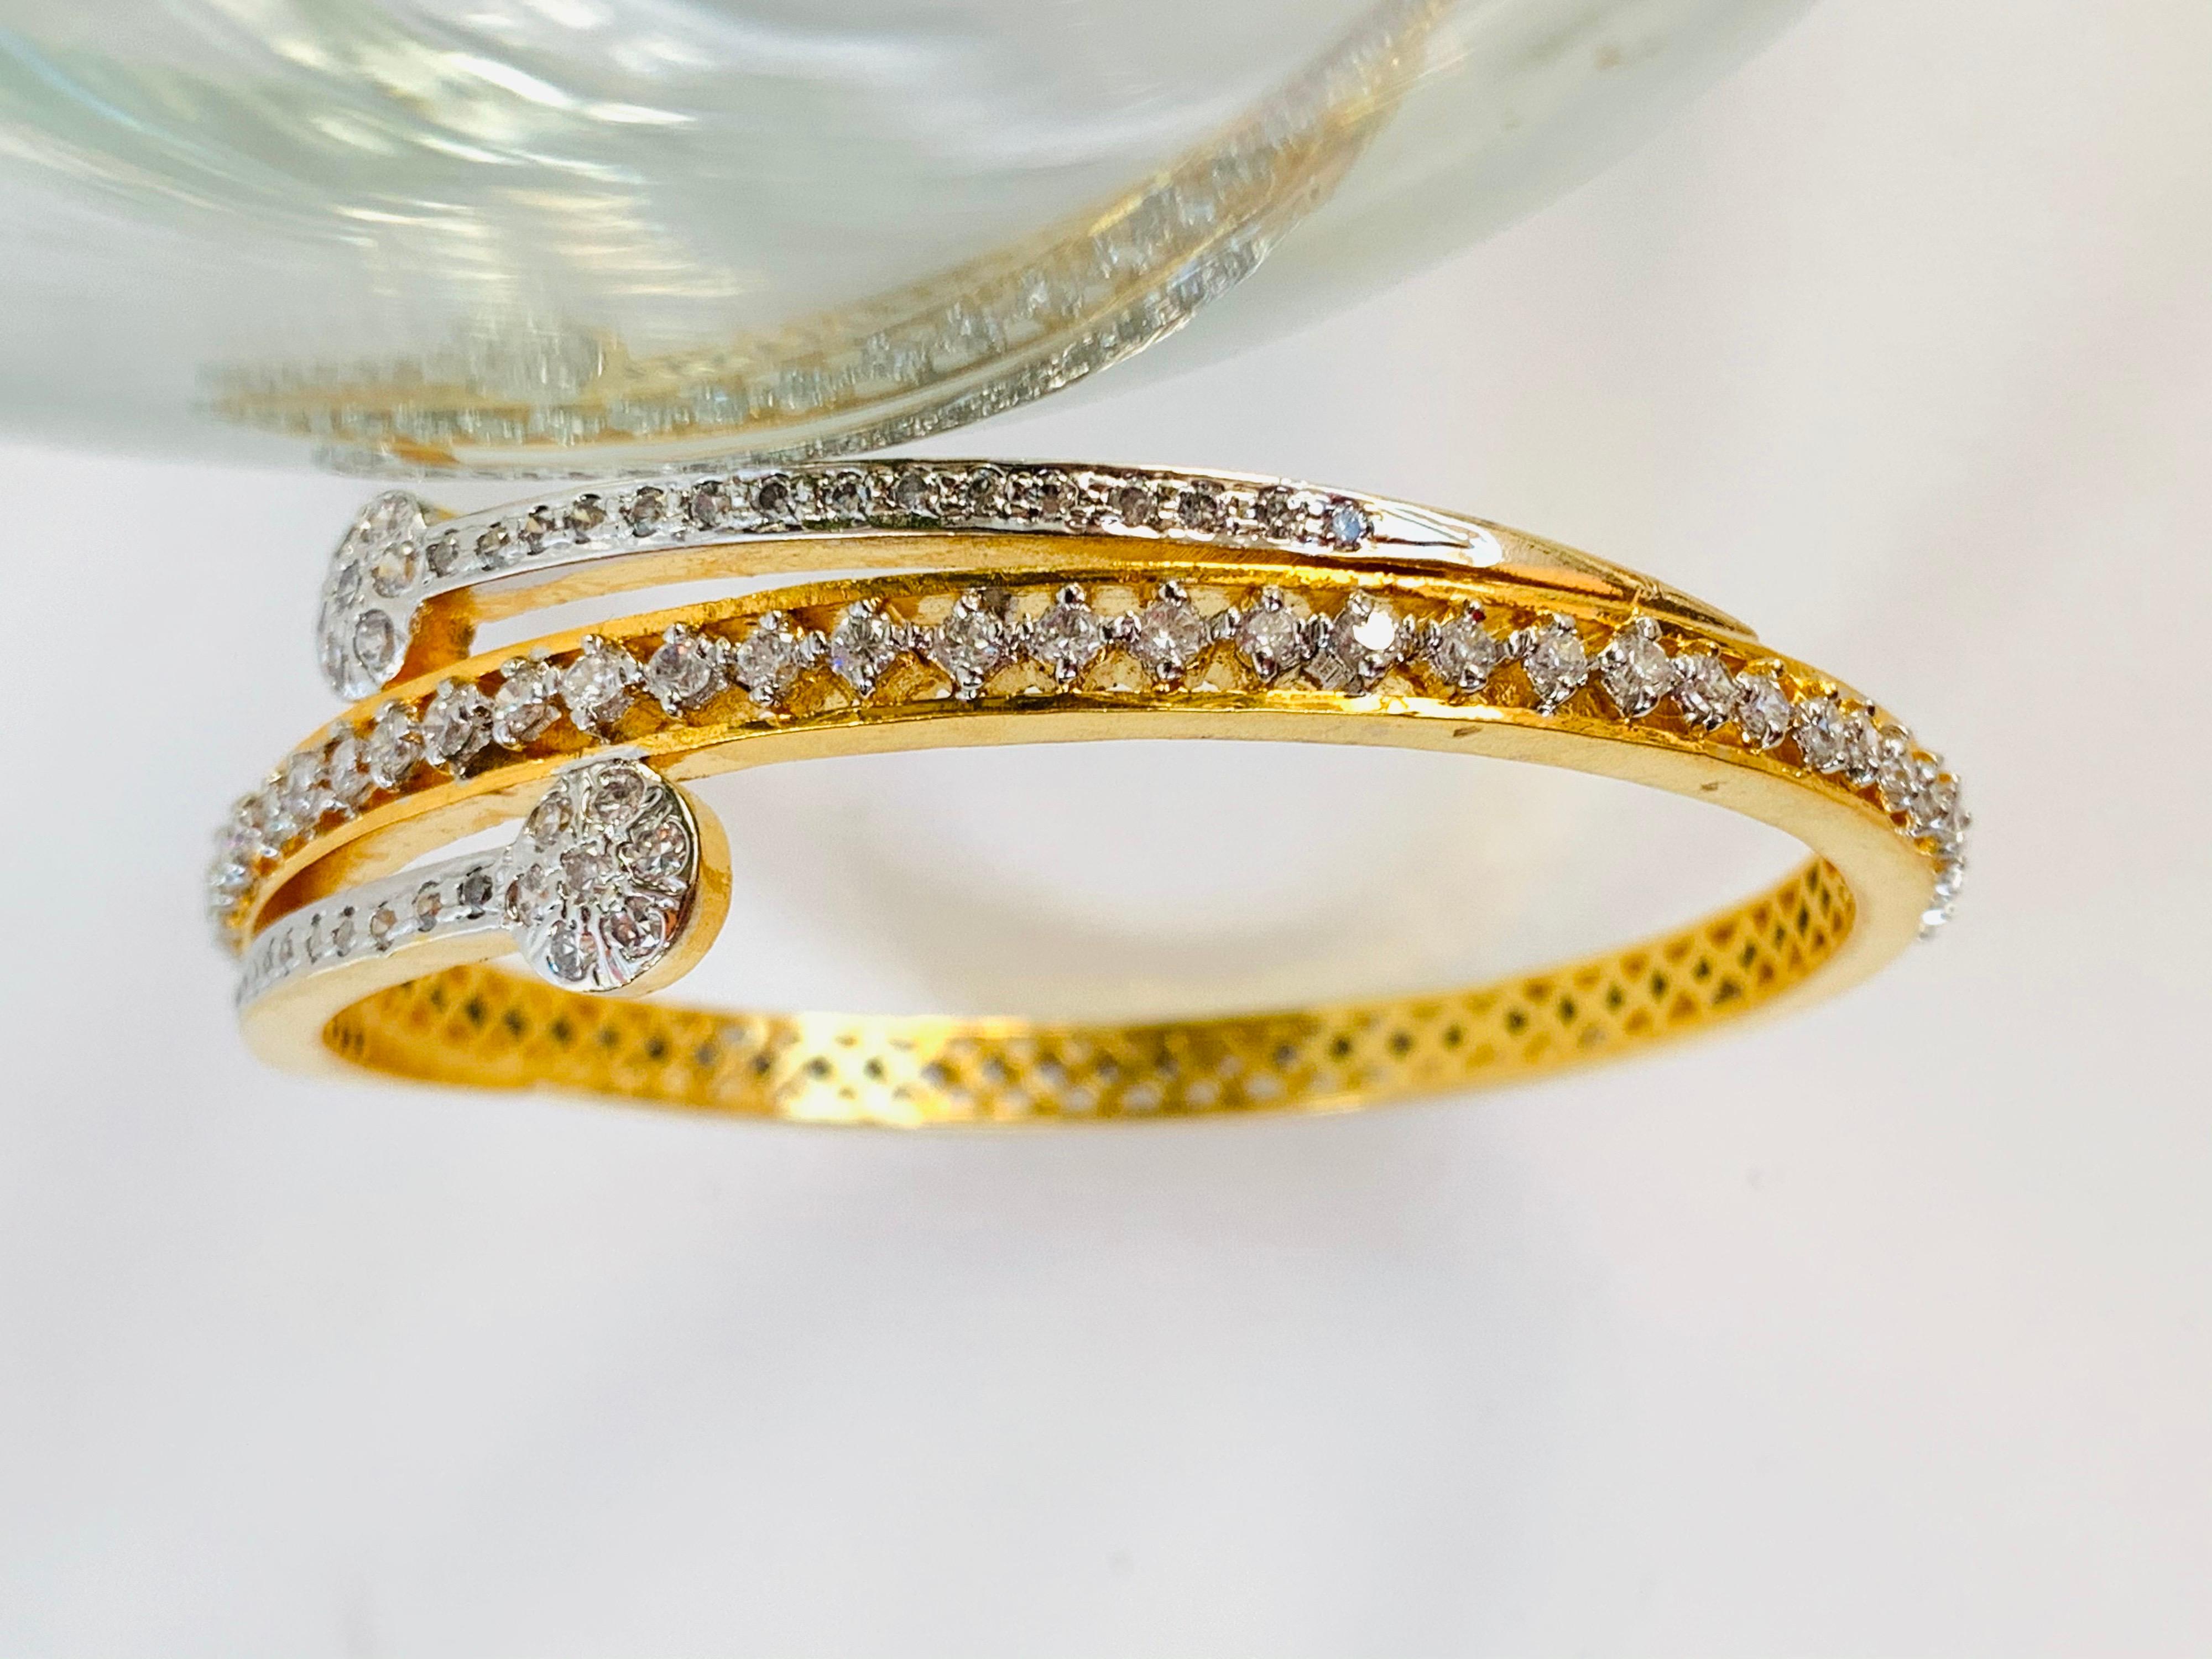 Hand made slip on bangle embellished with sparkling cubic zircon. Inner diameter 65.00 mm (2.56 in), inner circumference 204.2 mm (8.04 in).  Single Bangle.

FOLLOW MEGHNA JEWELS storefront to view the latest collection & exclusive pieces. Meghna